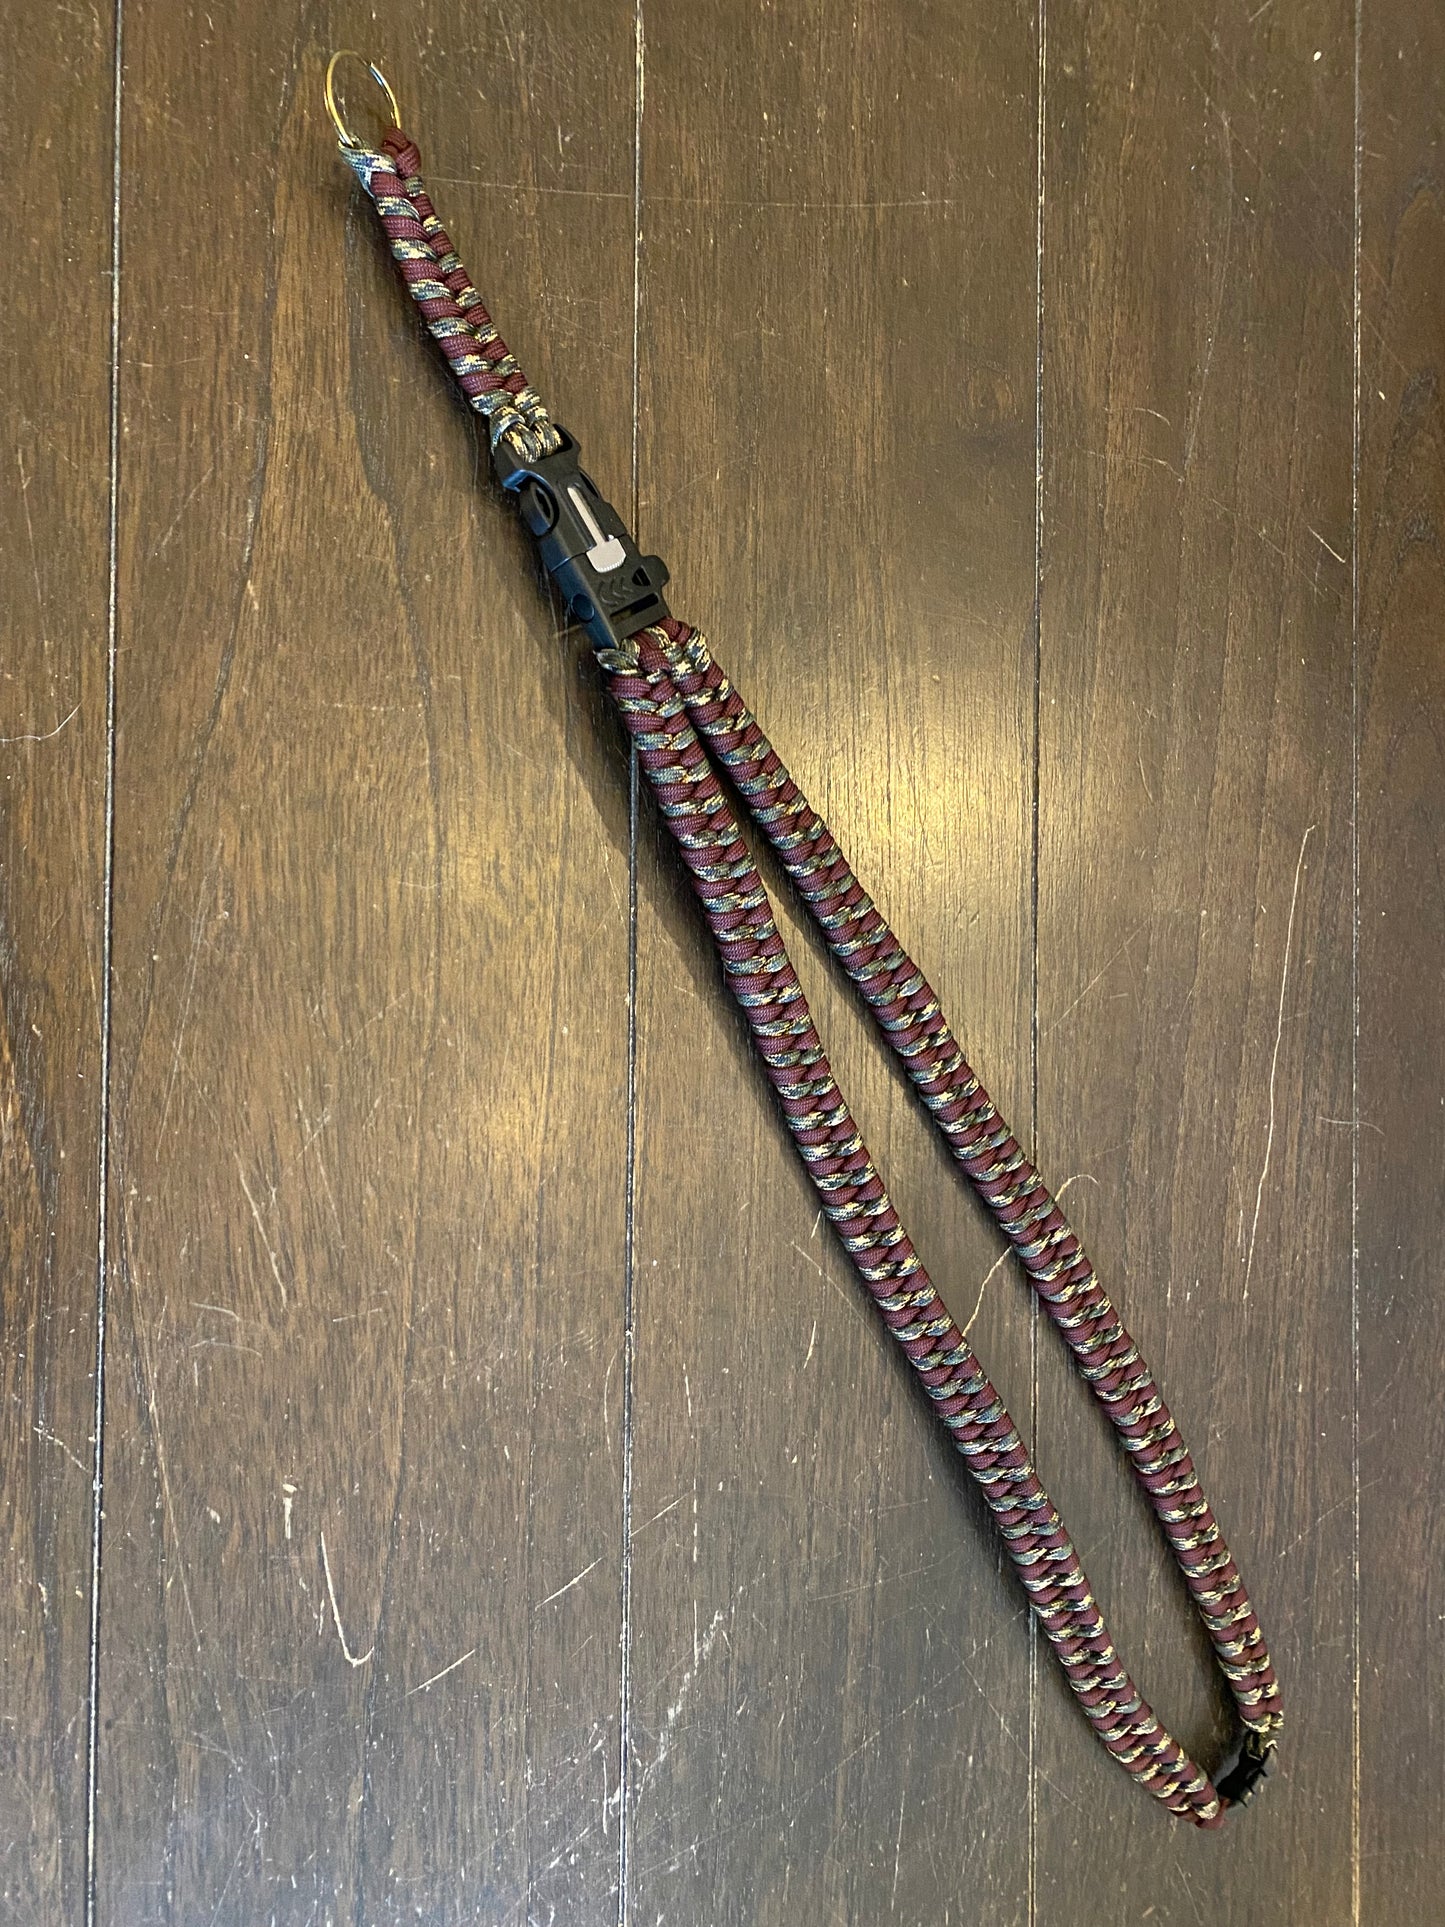 Premade Paracord Fishtail Lanyard, Forest Camo and Maroon with Keyring